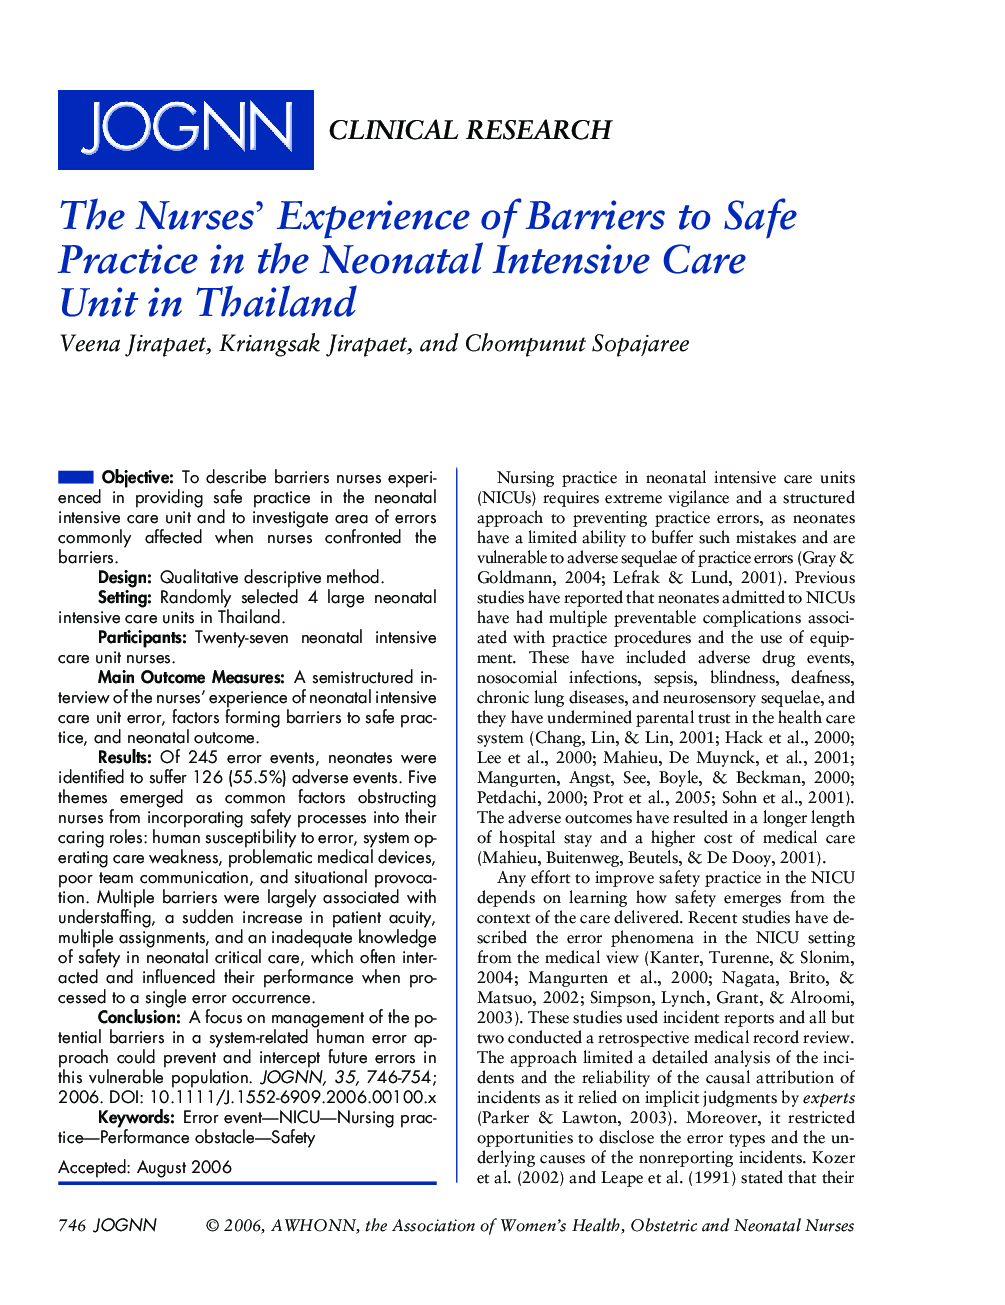 The Nurses' Experience of Barriers to Safe Practice in the Neonatal Intensive Care Unit in Thailand